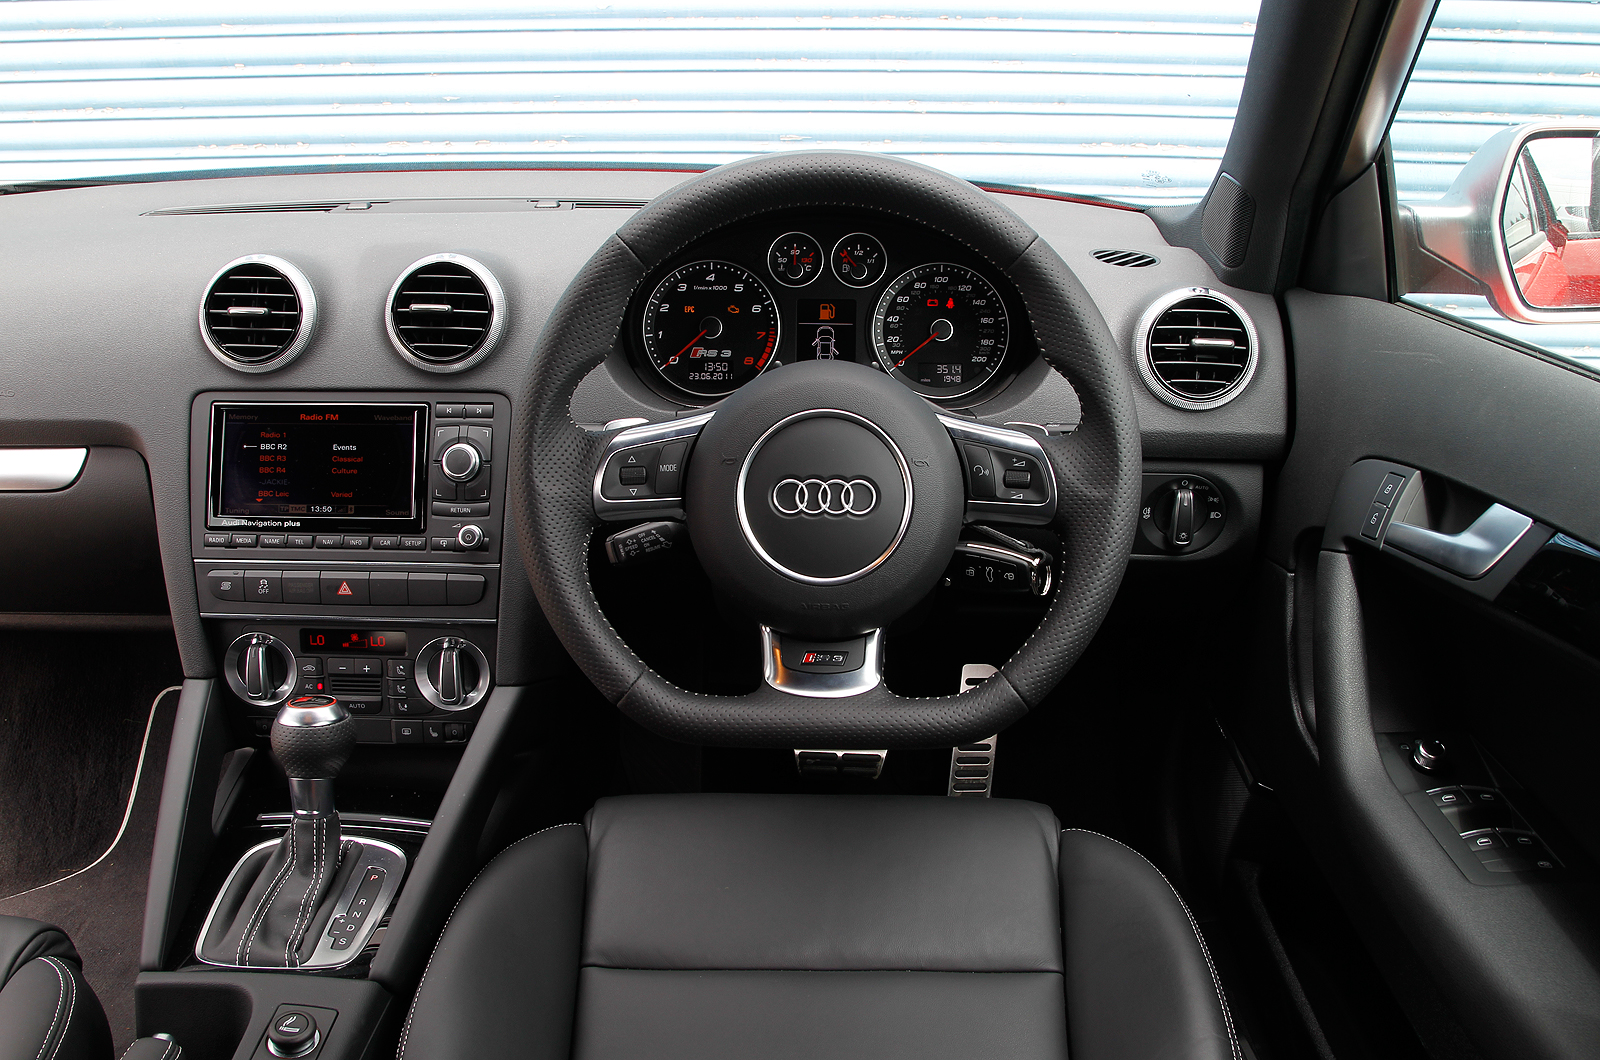 Audi RS3 driver's seat